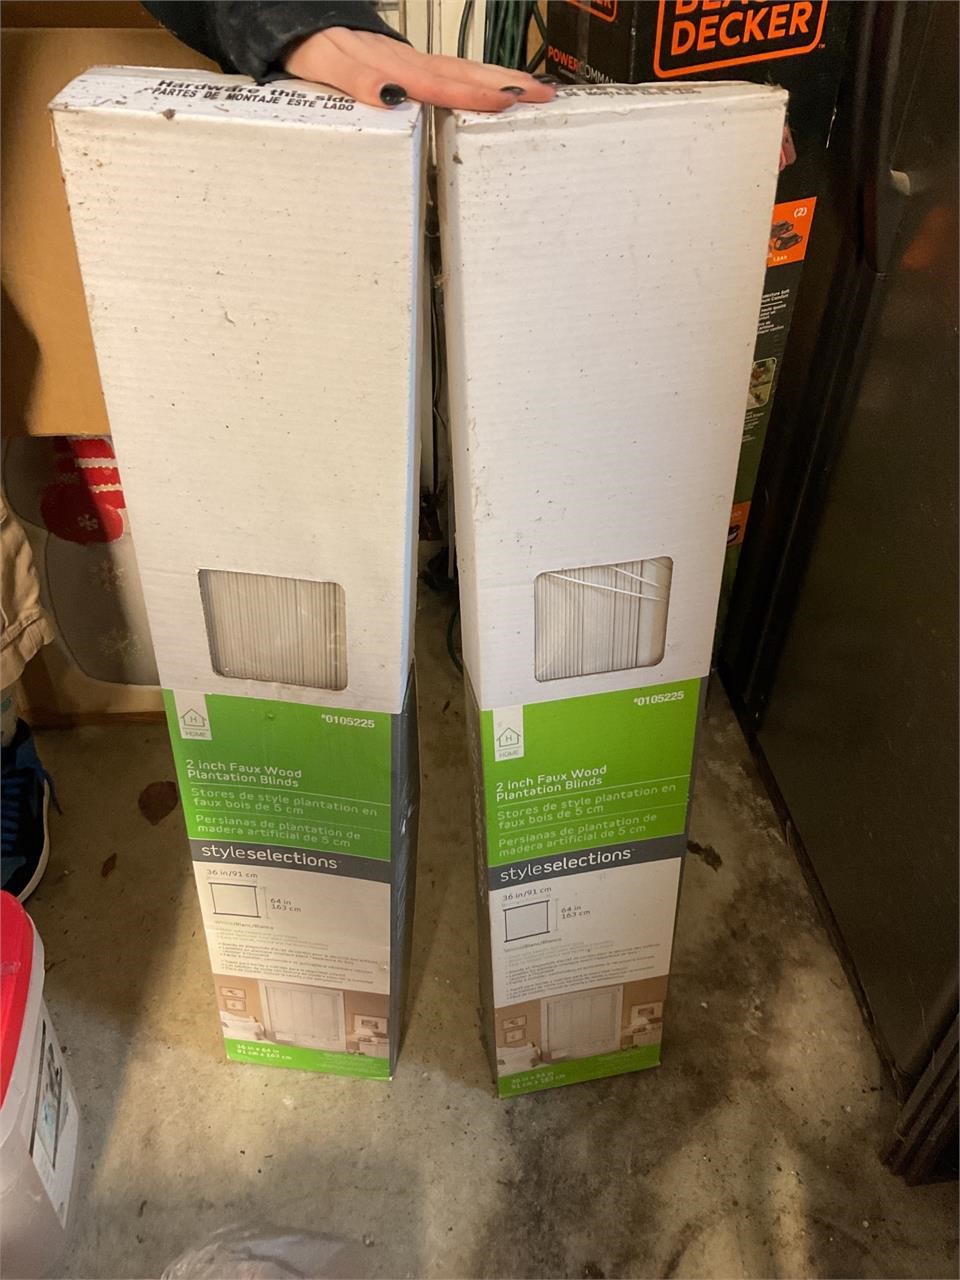 Lot of window blinds